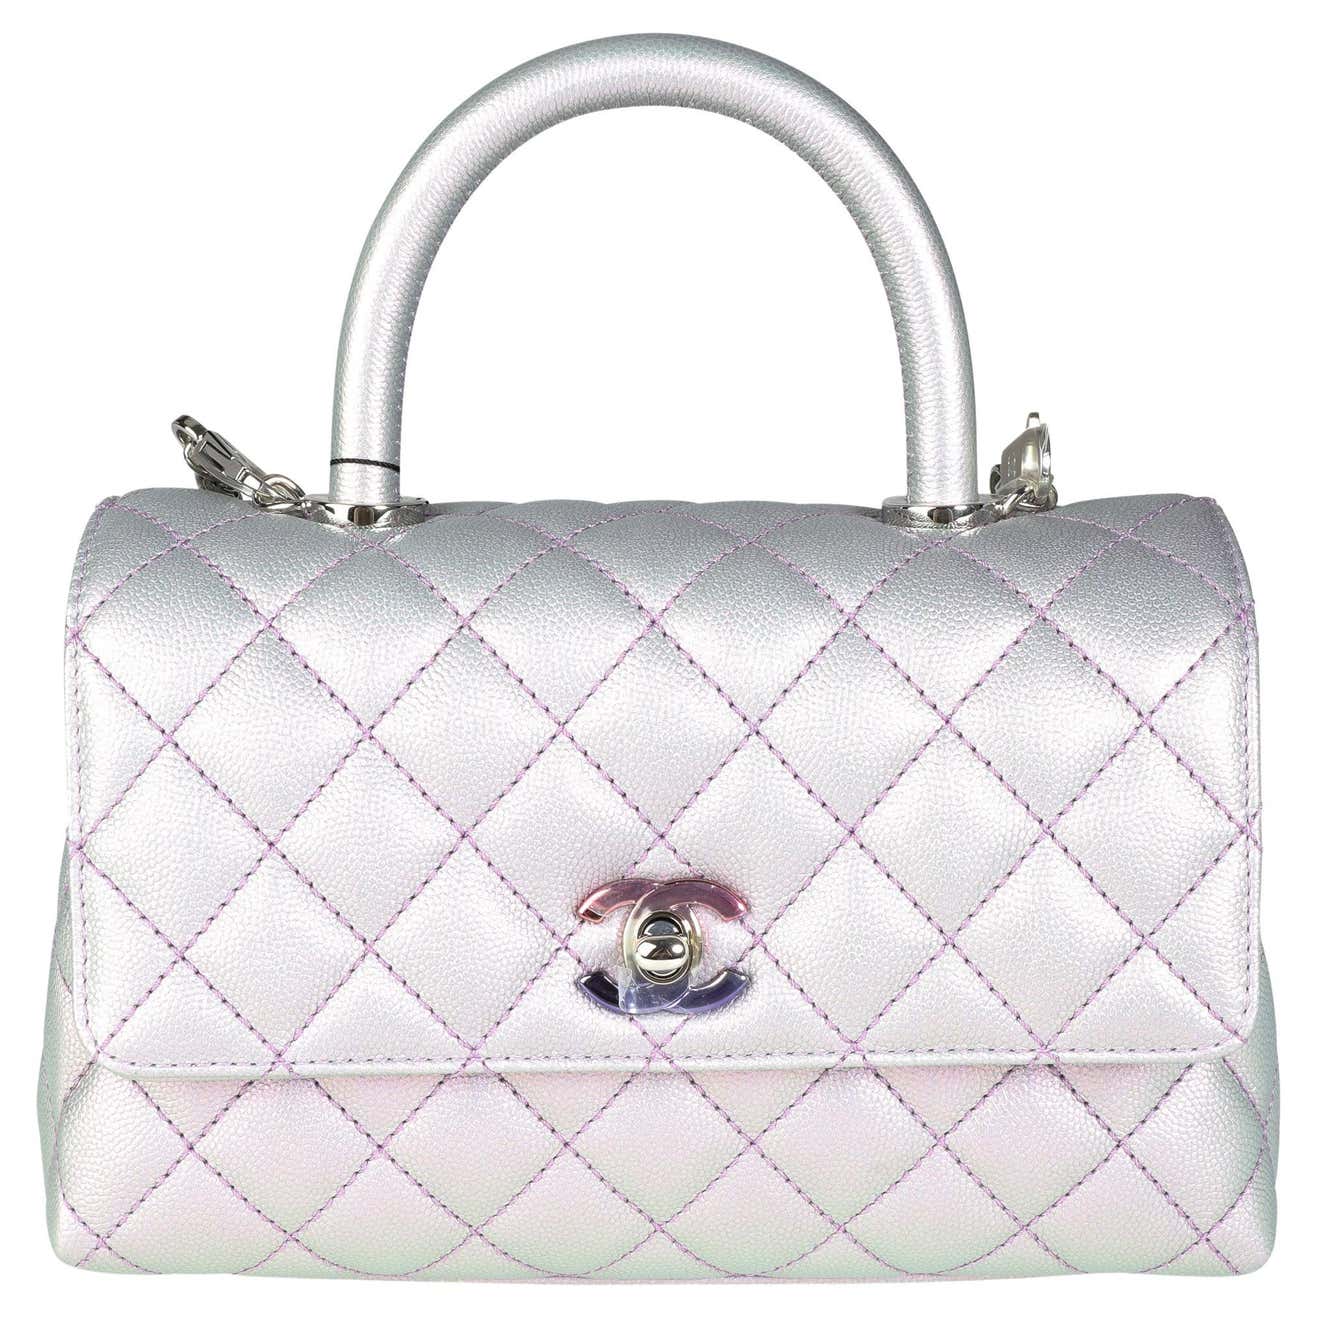 Chanel Light Purple Iridescent Quilted Caviar Small Coco Top Handle Bag ...